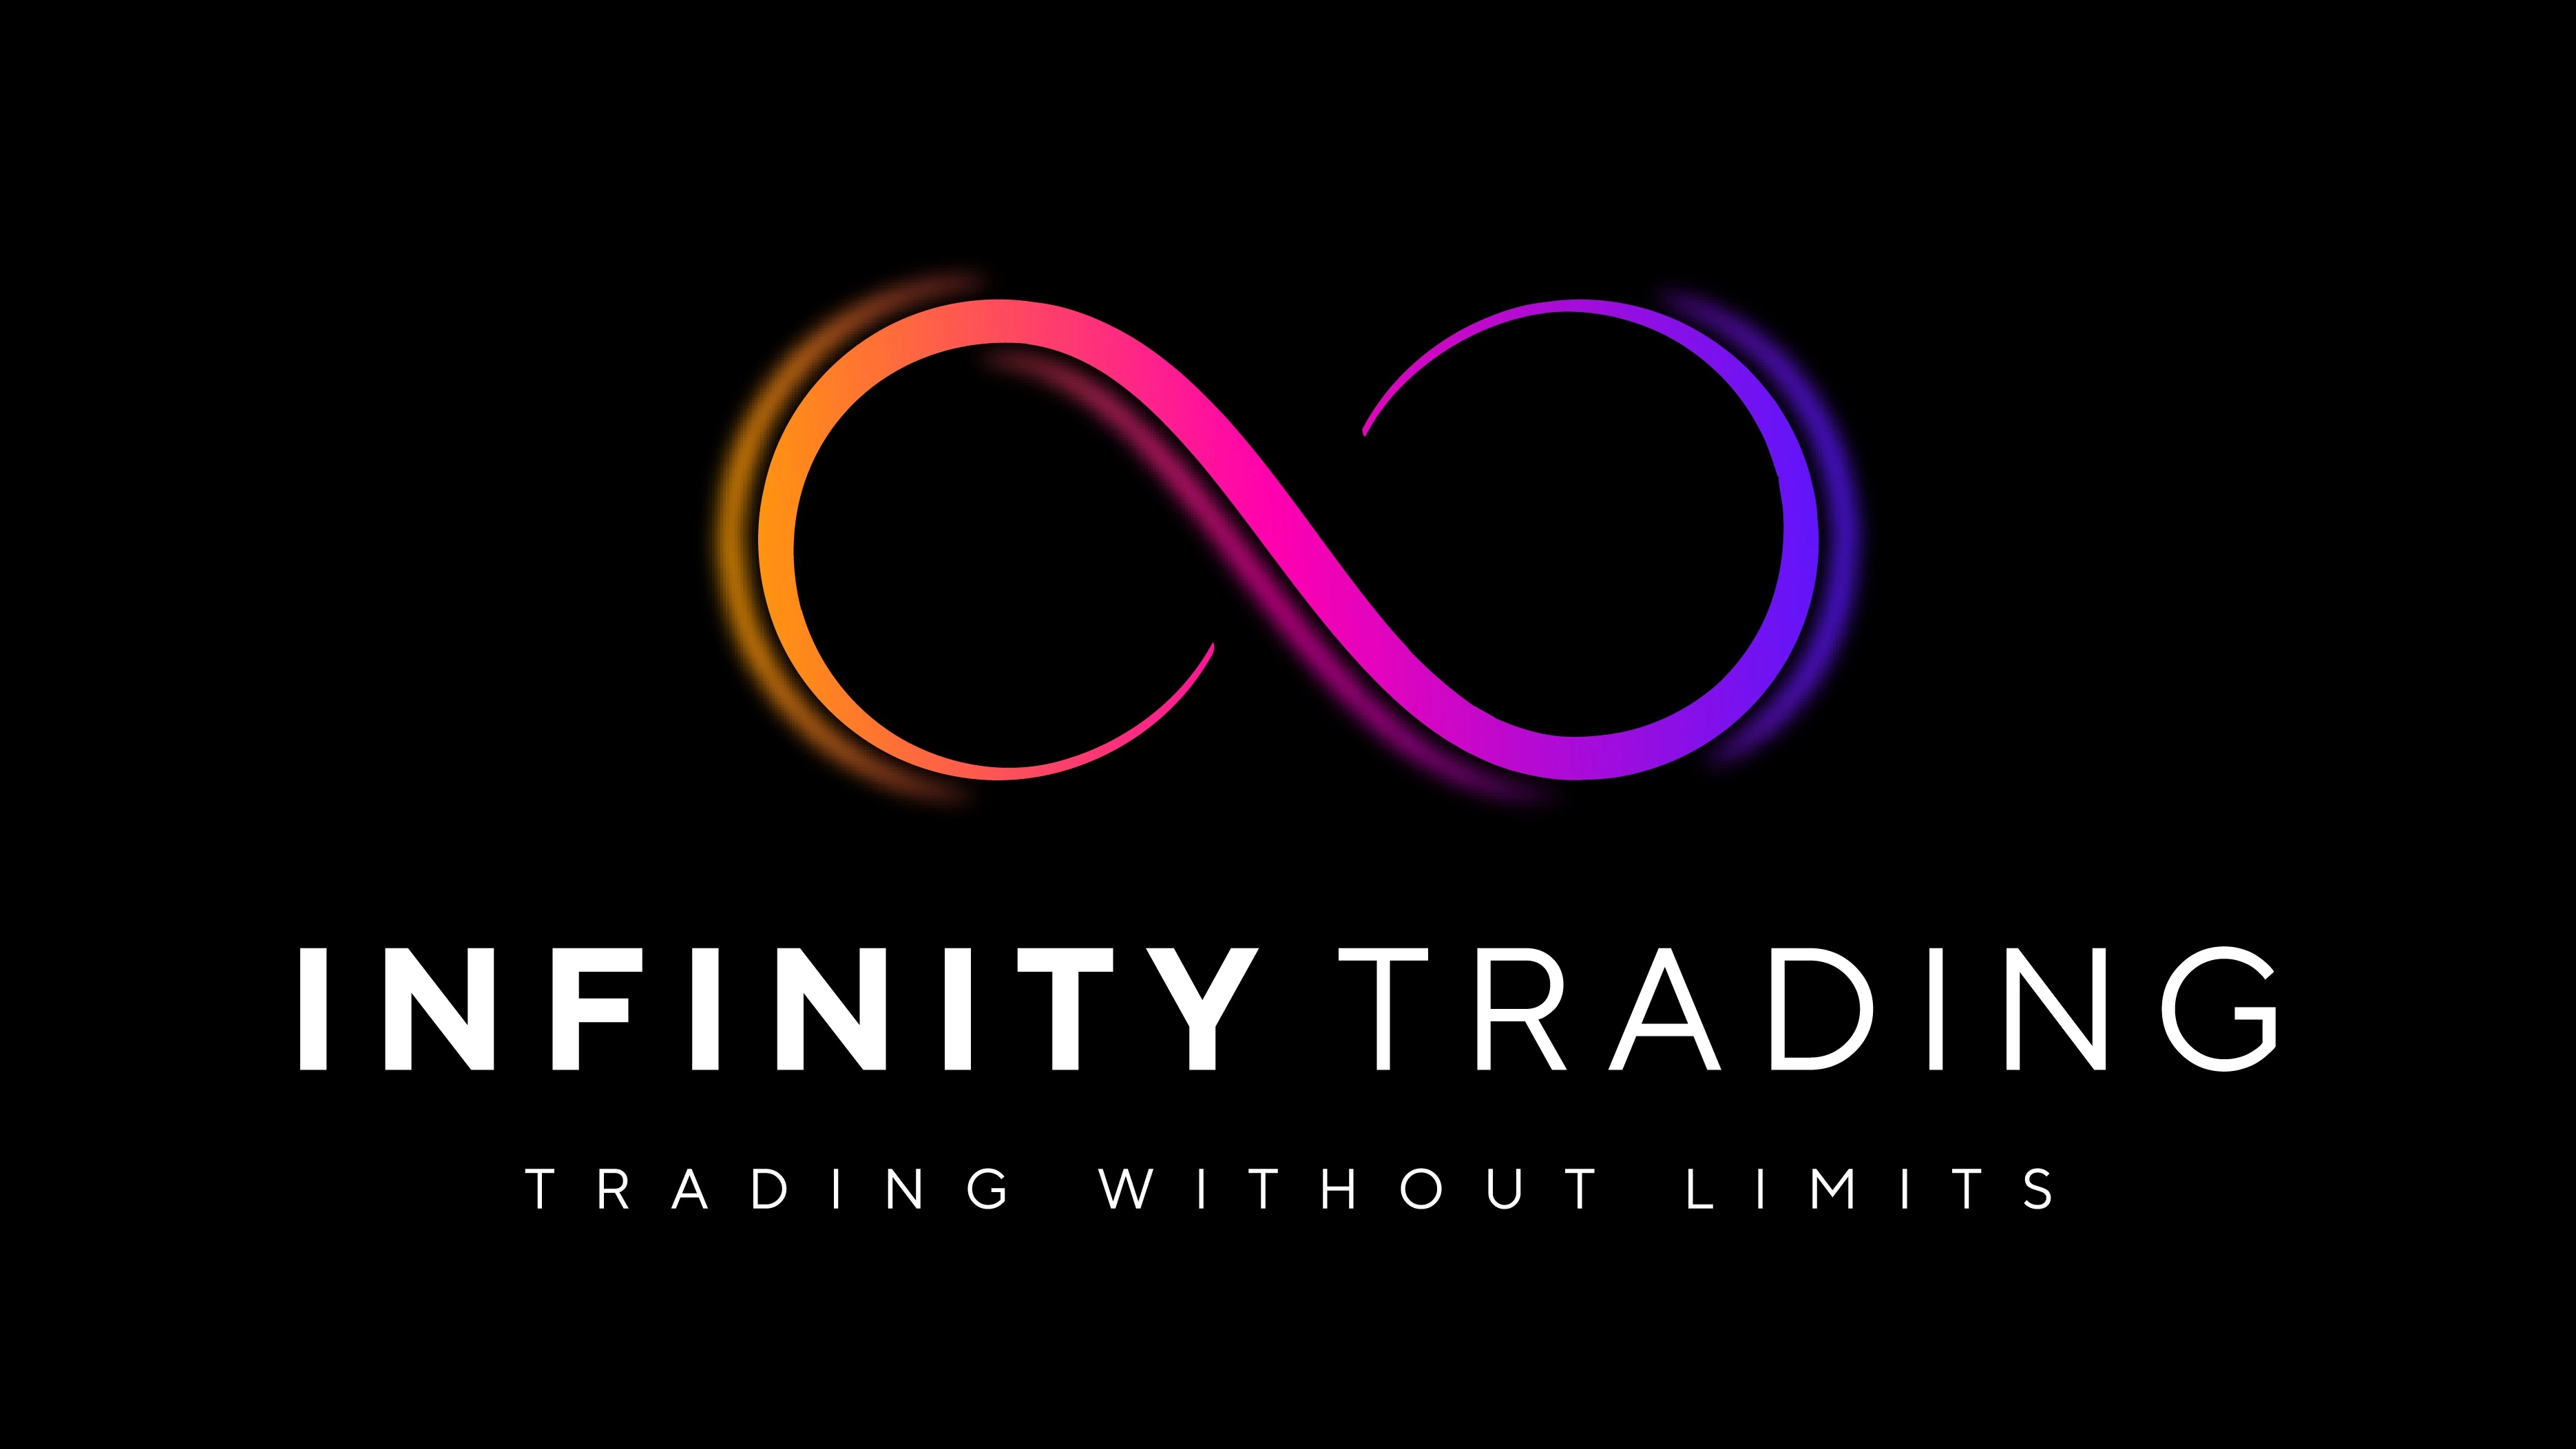 About Infinity Trading